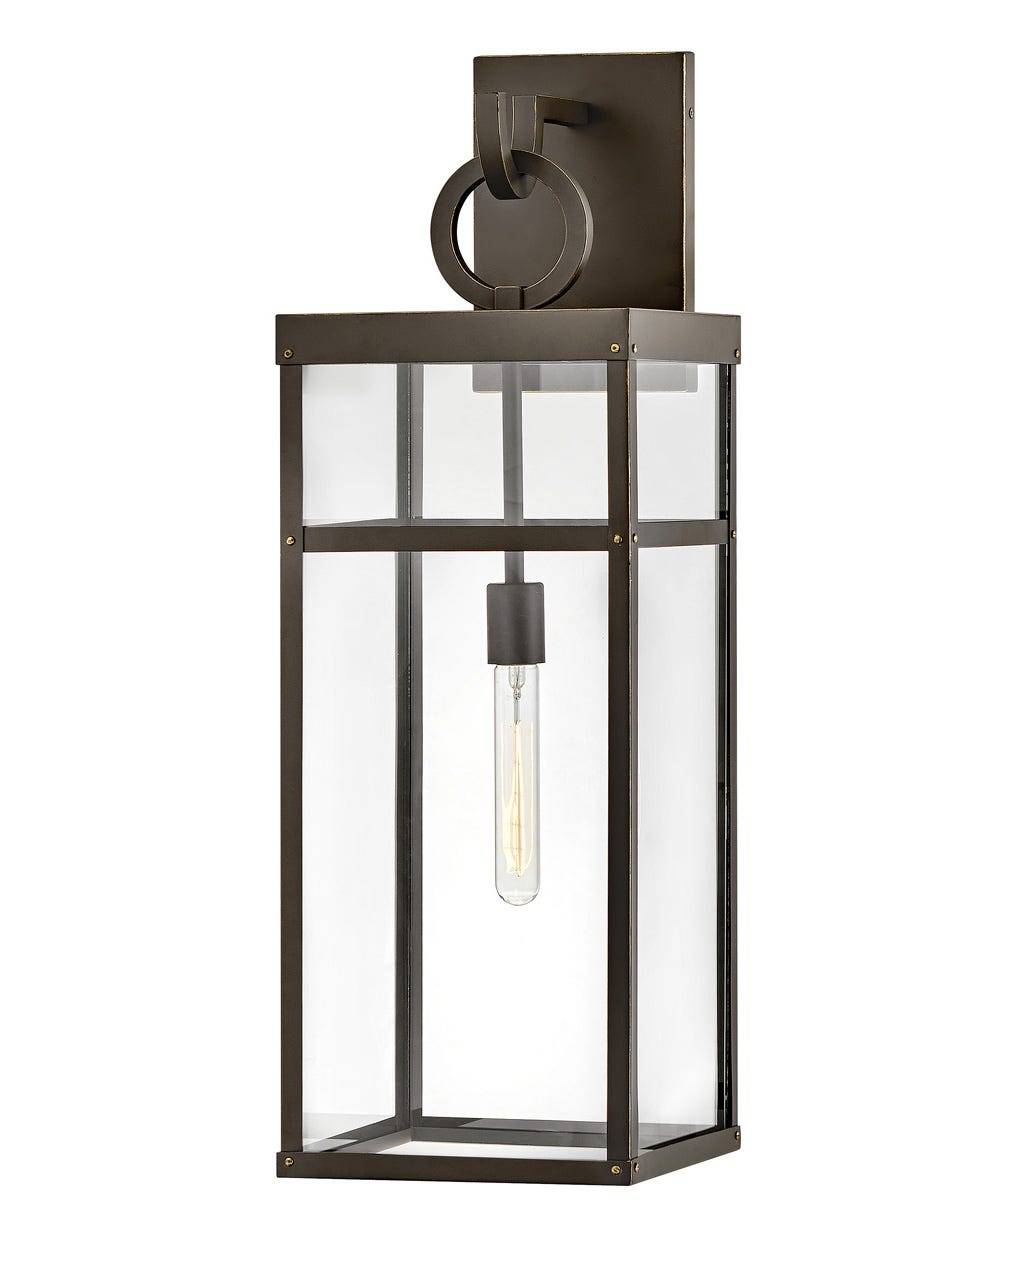 OUTDOOR PORTER Wall Mount Lantern Outdoor l Wall Hinkley Oil Rubbed Bronze 10.75x9.5x29.0 